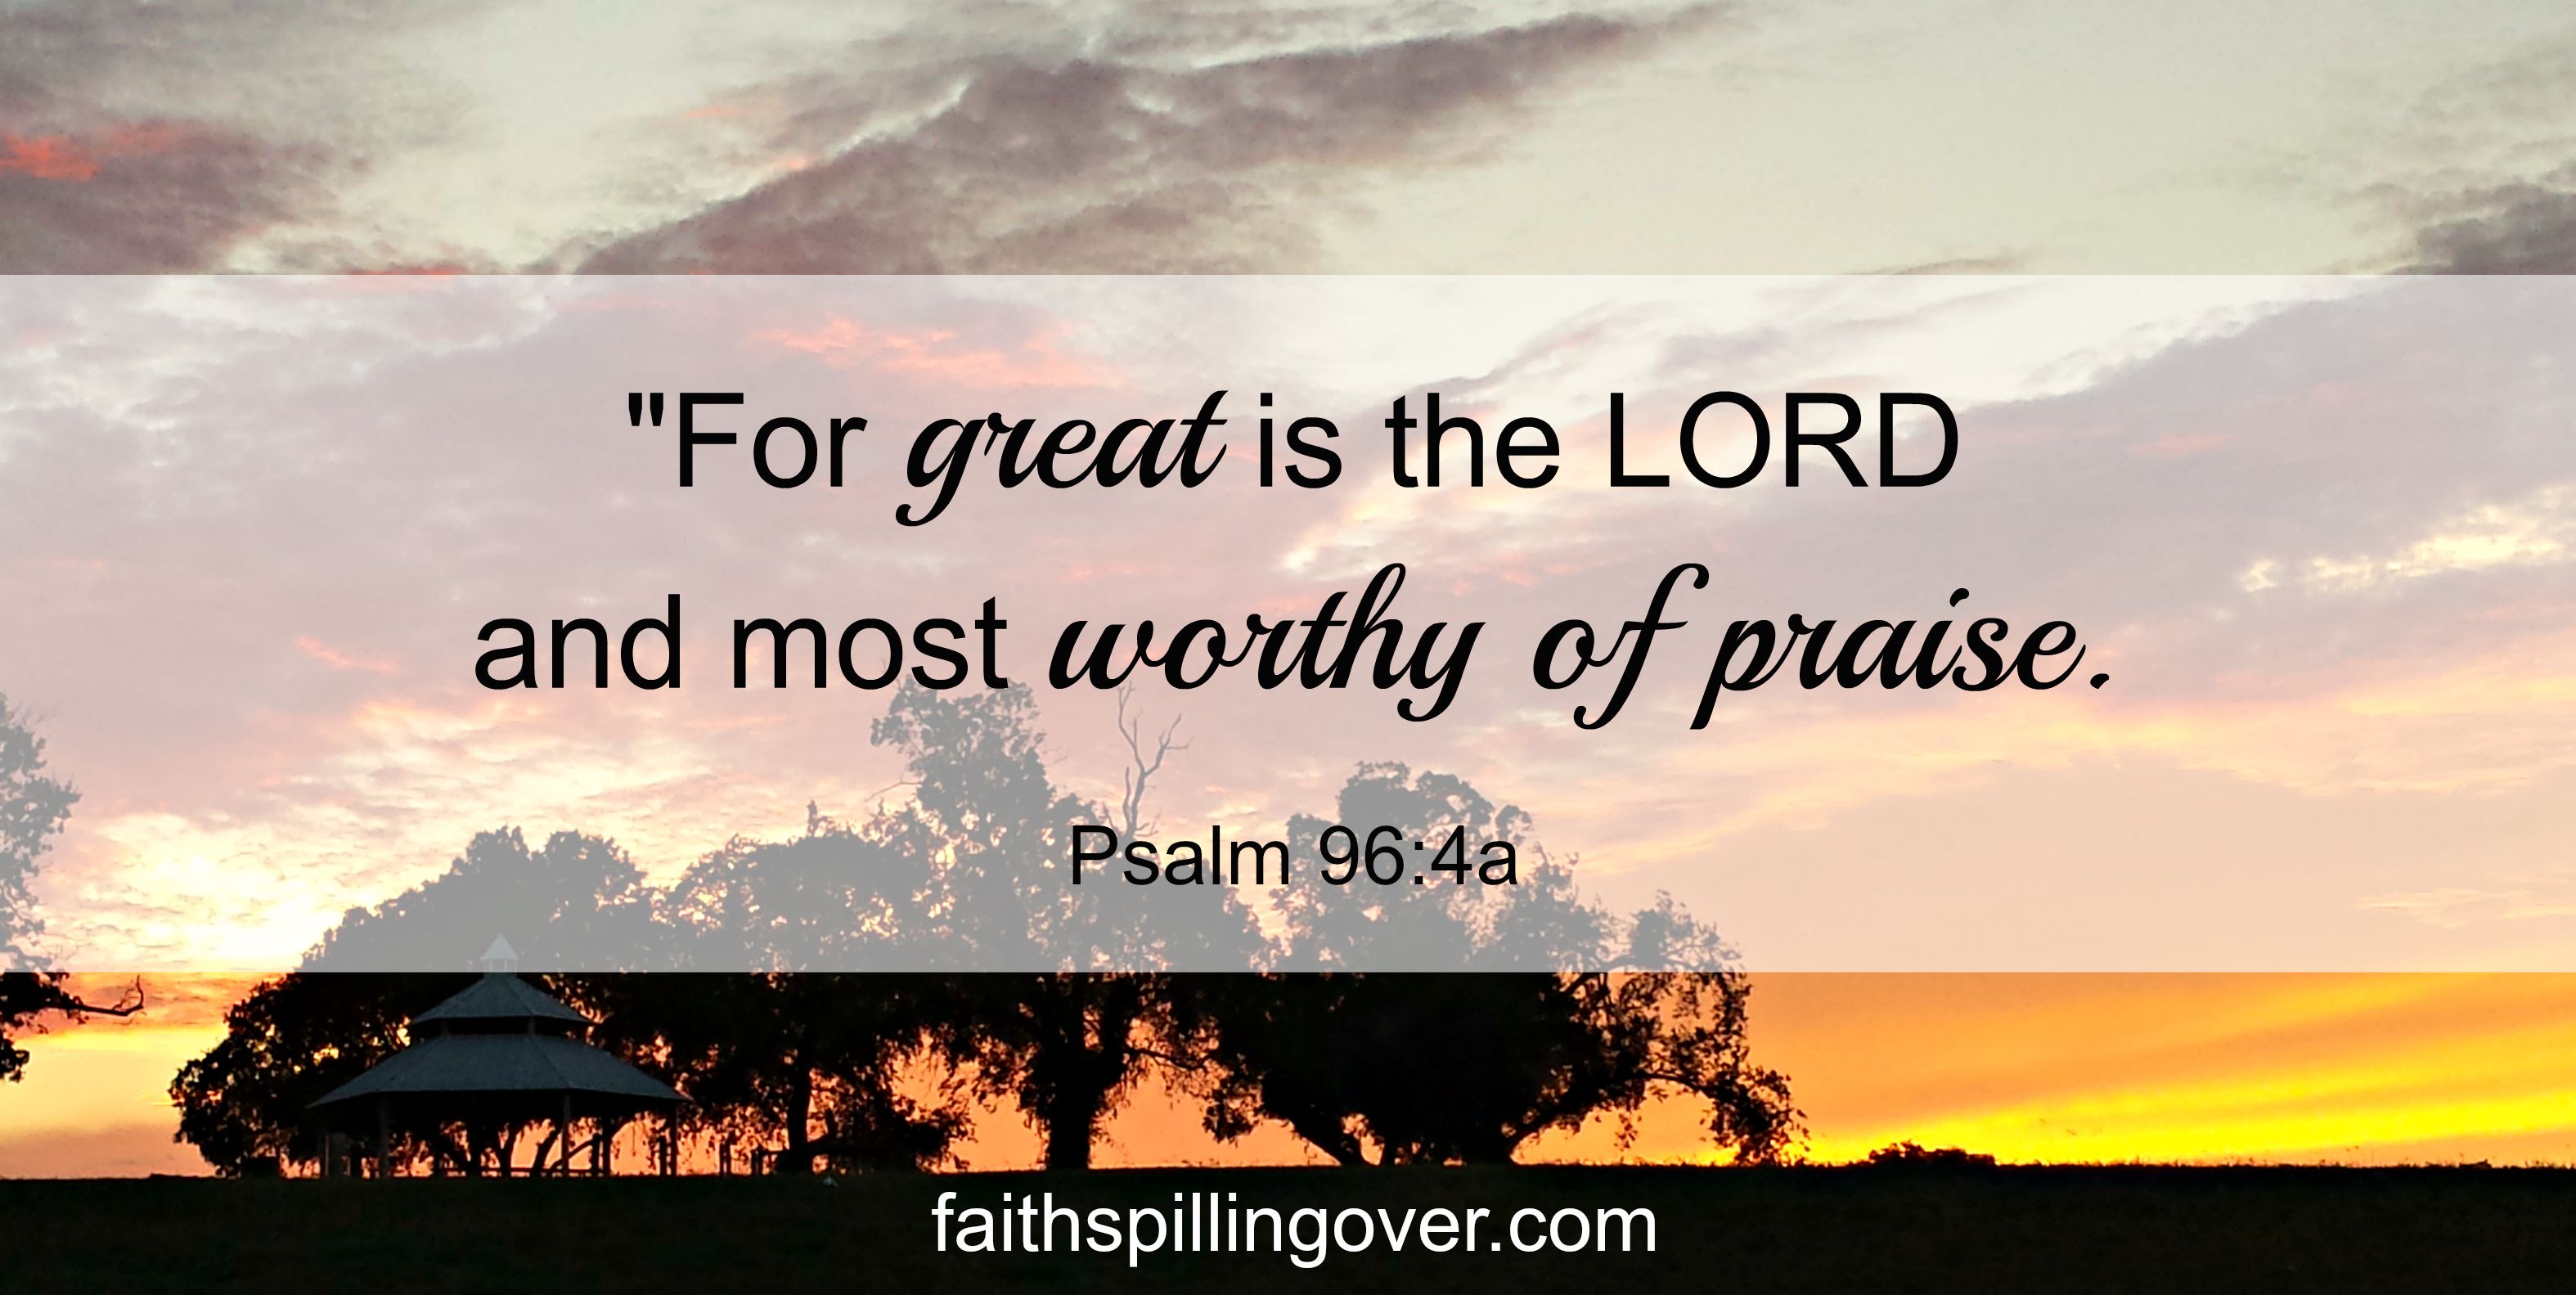 Great is the Lord scripture